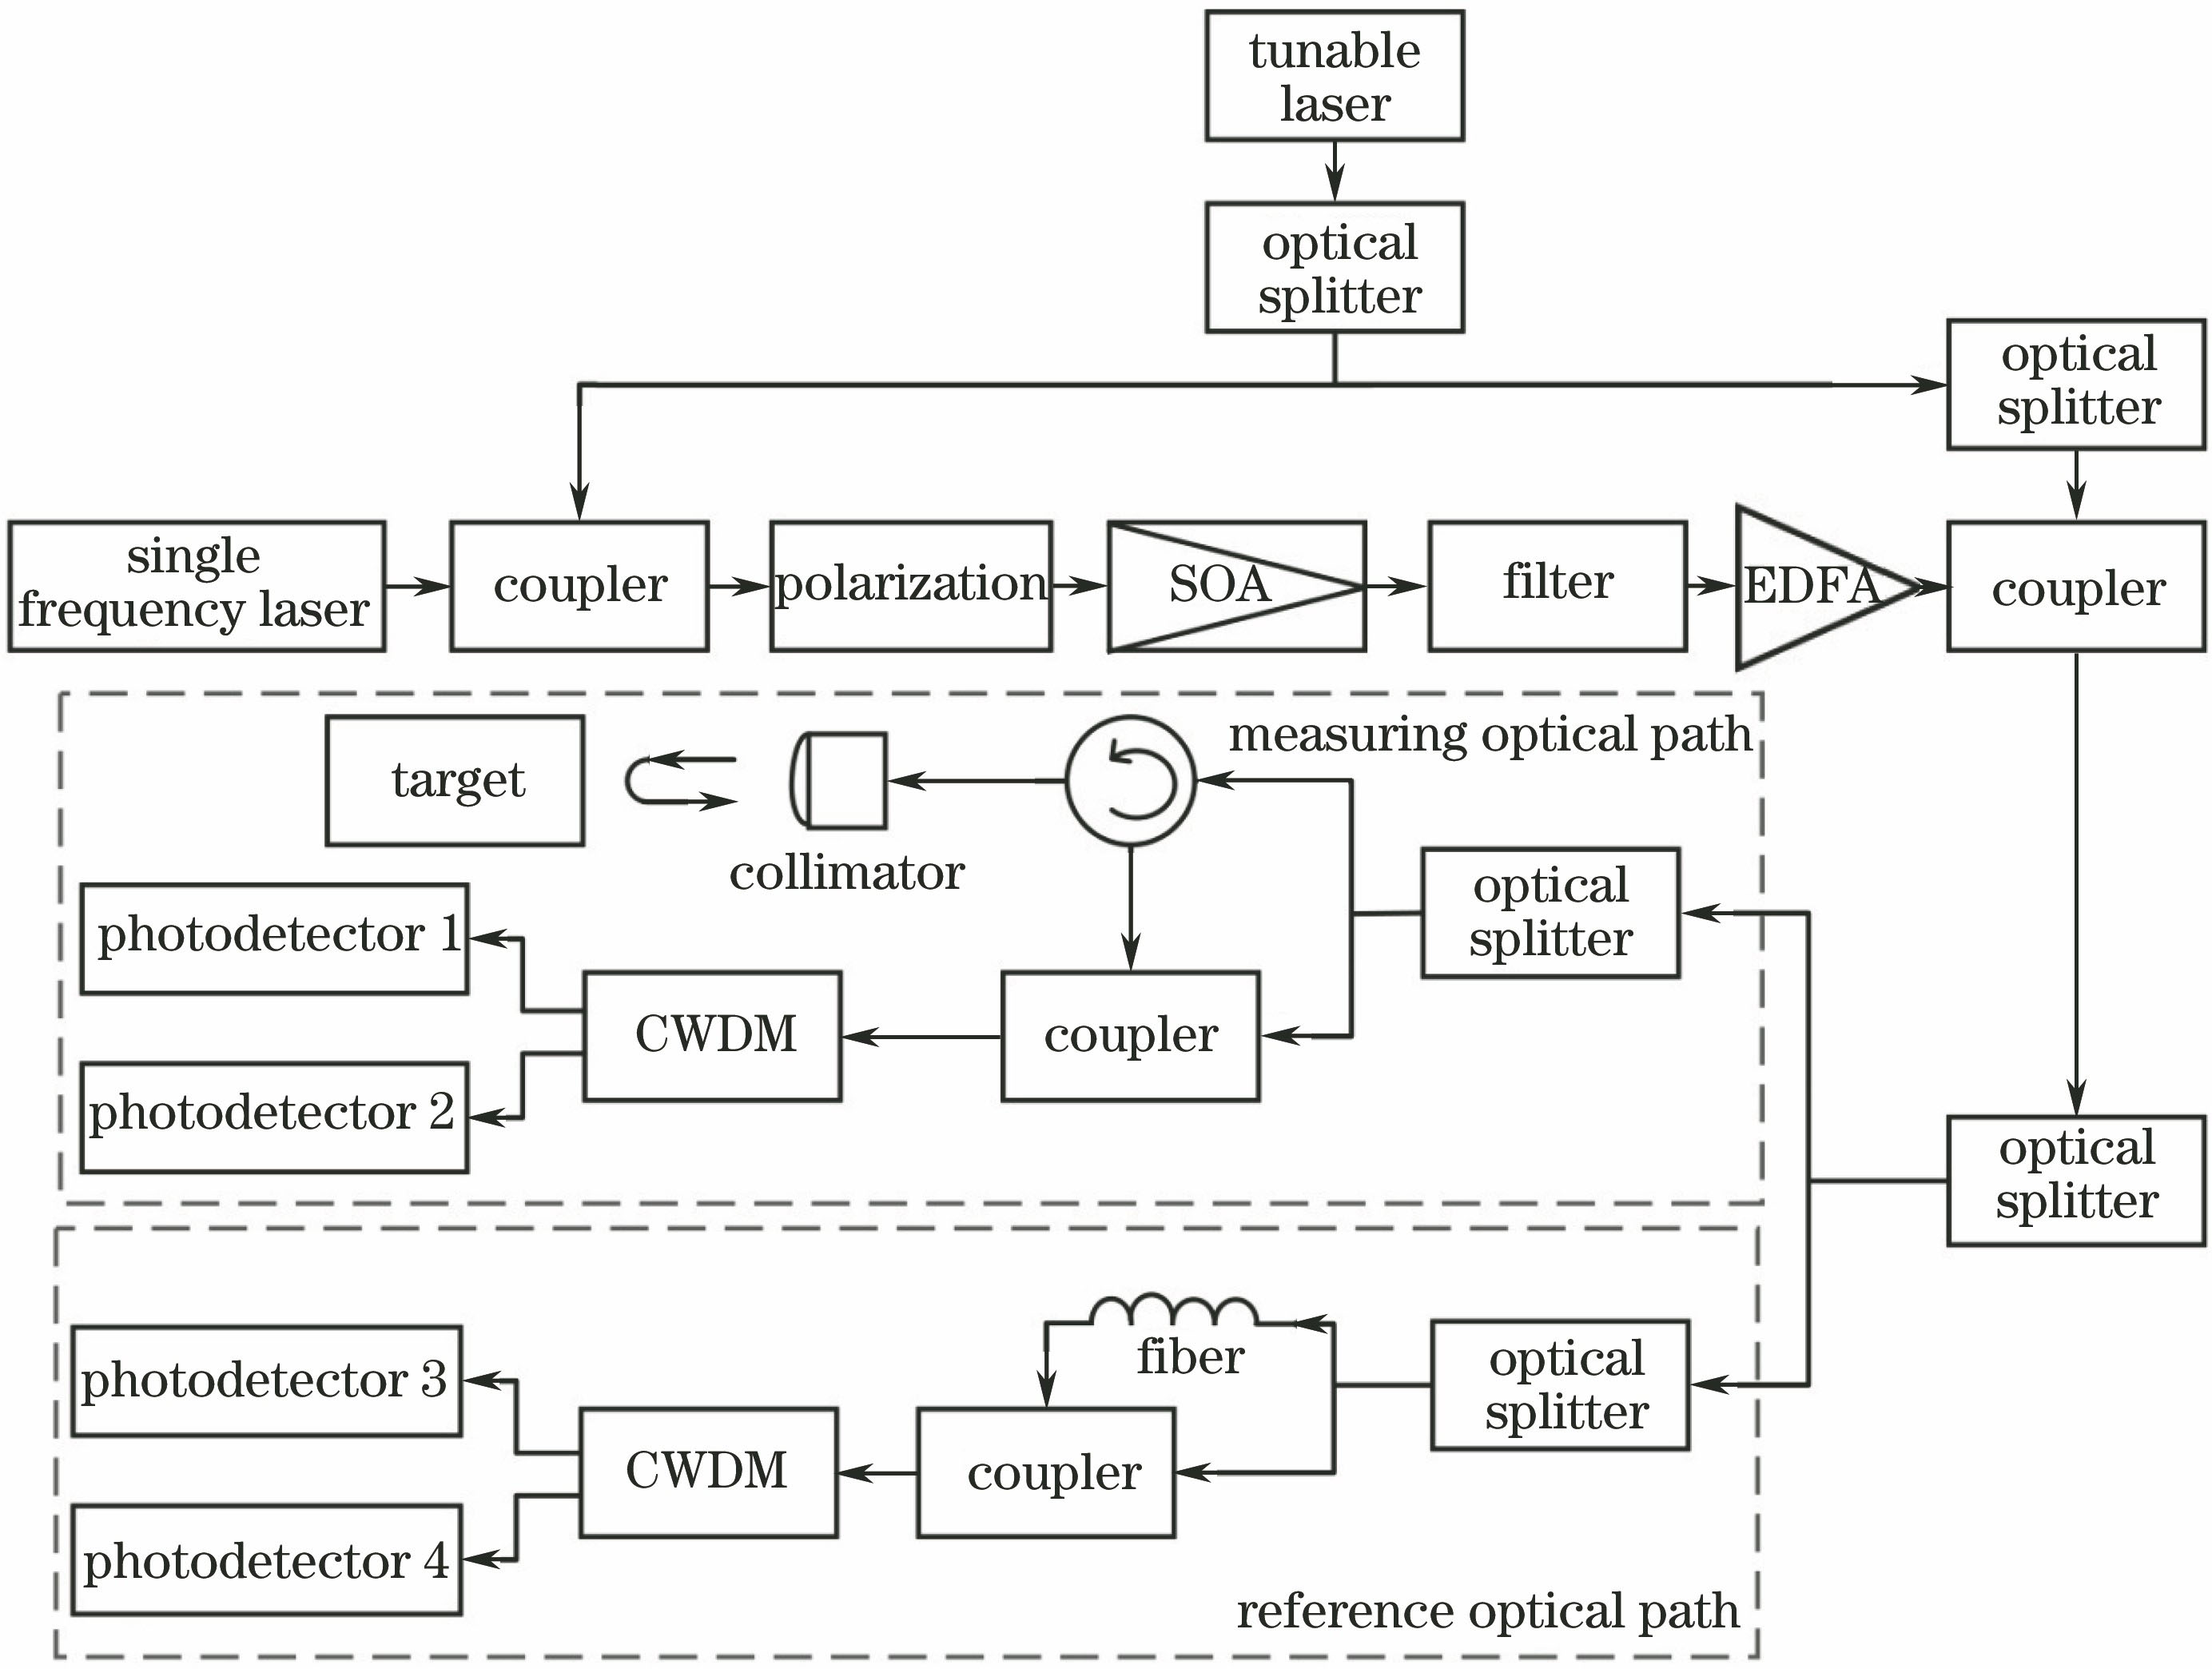 Structural diagram of FMCW laser ranging system based on FWM effect